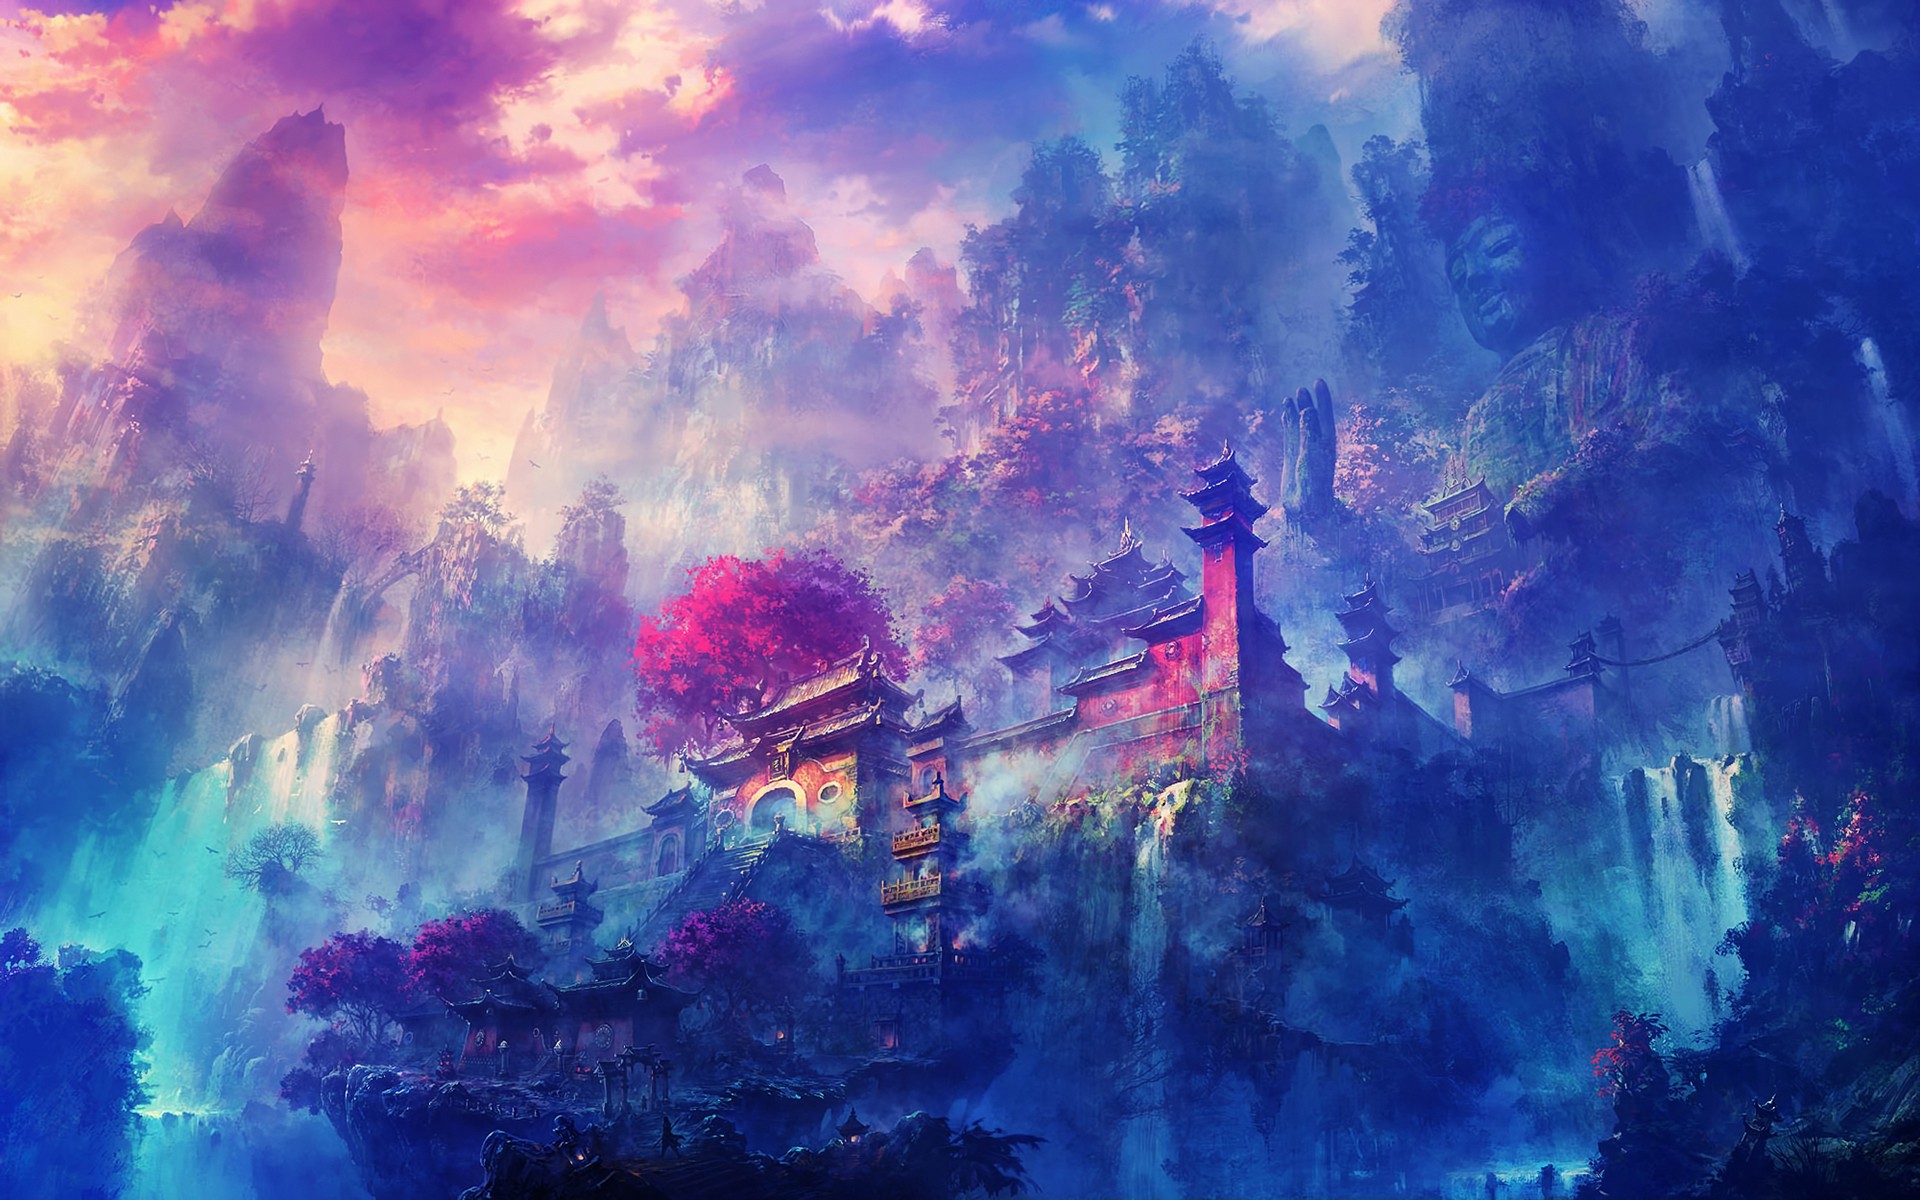 Weekly Wallpaper: Bring A Little Fantasy To Your Desktop